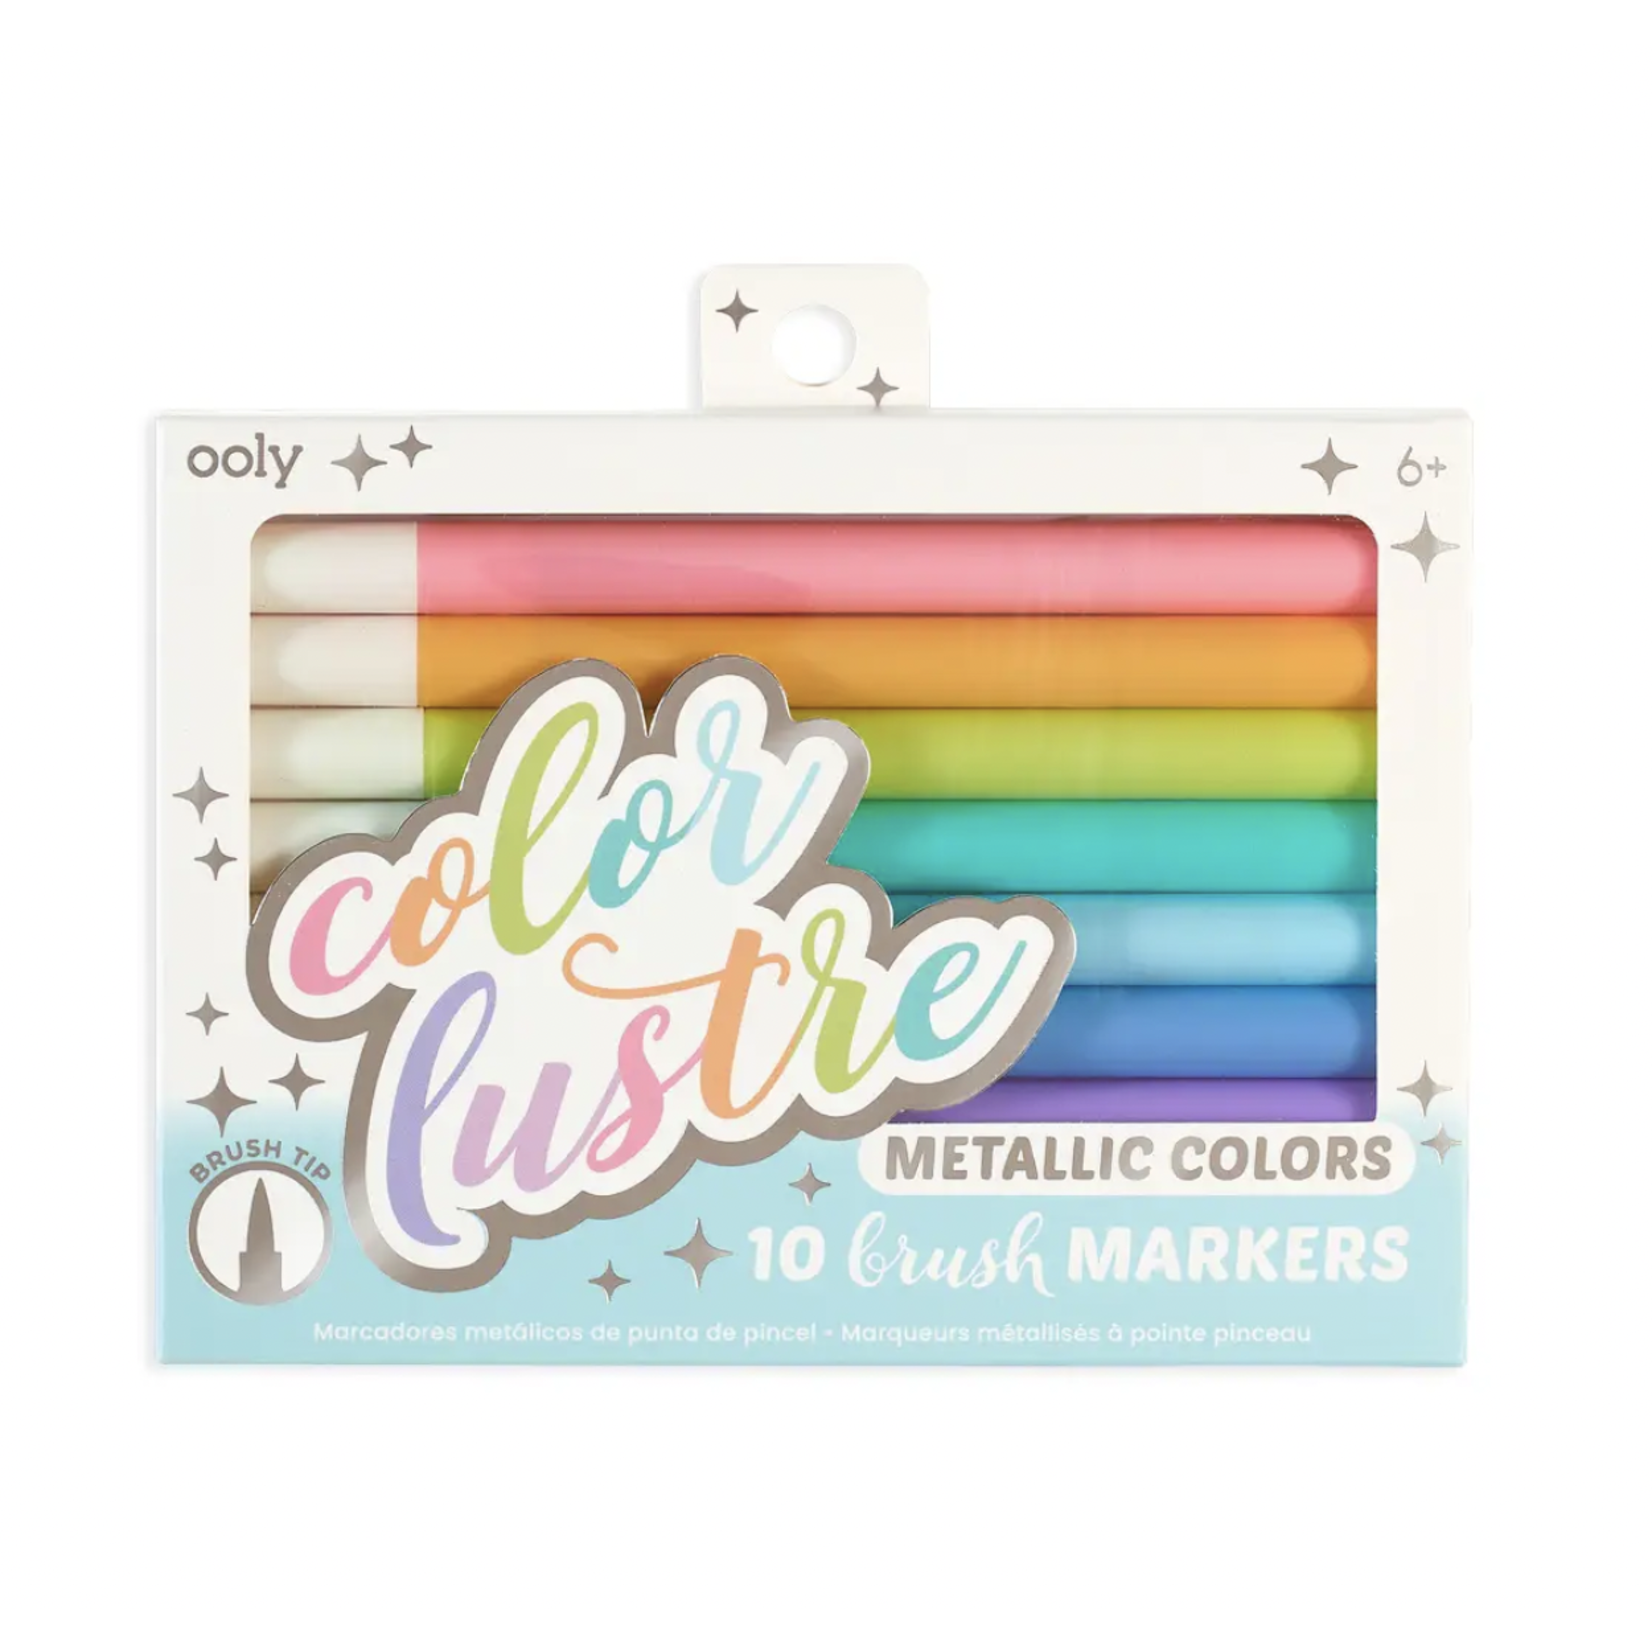 OOLY Color Lustre Metallic Brush Markers